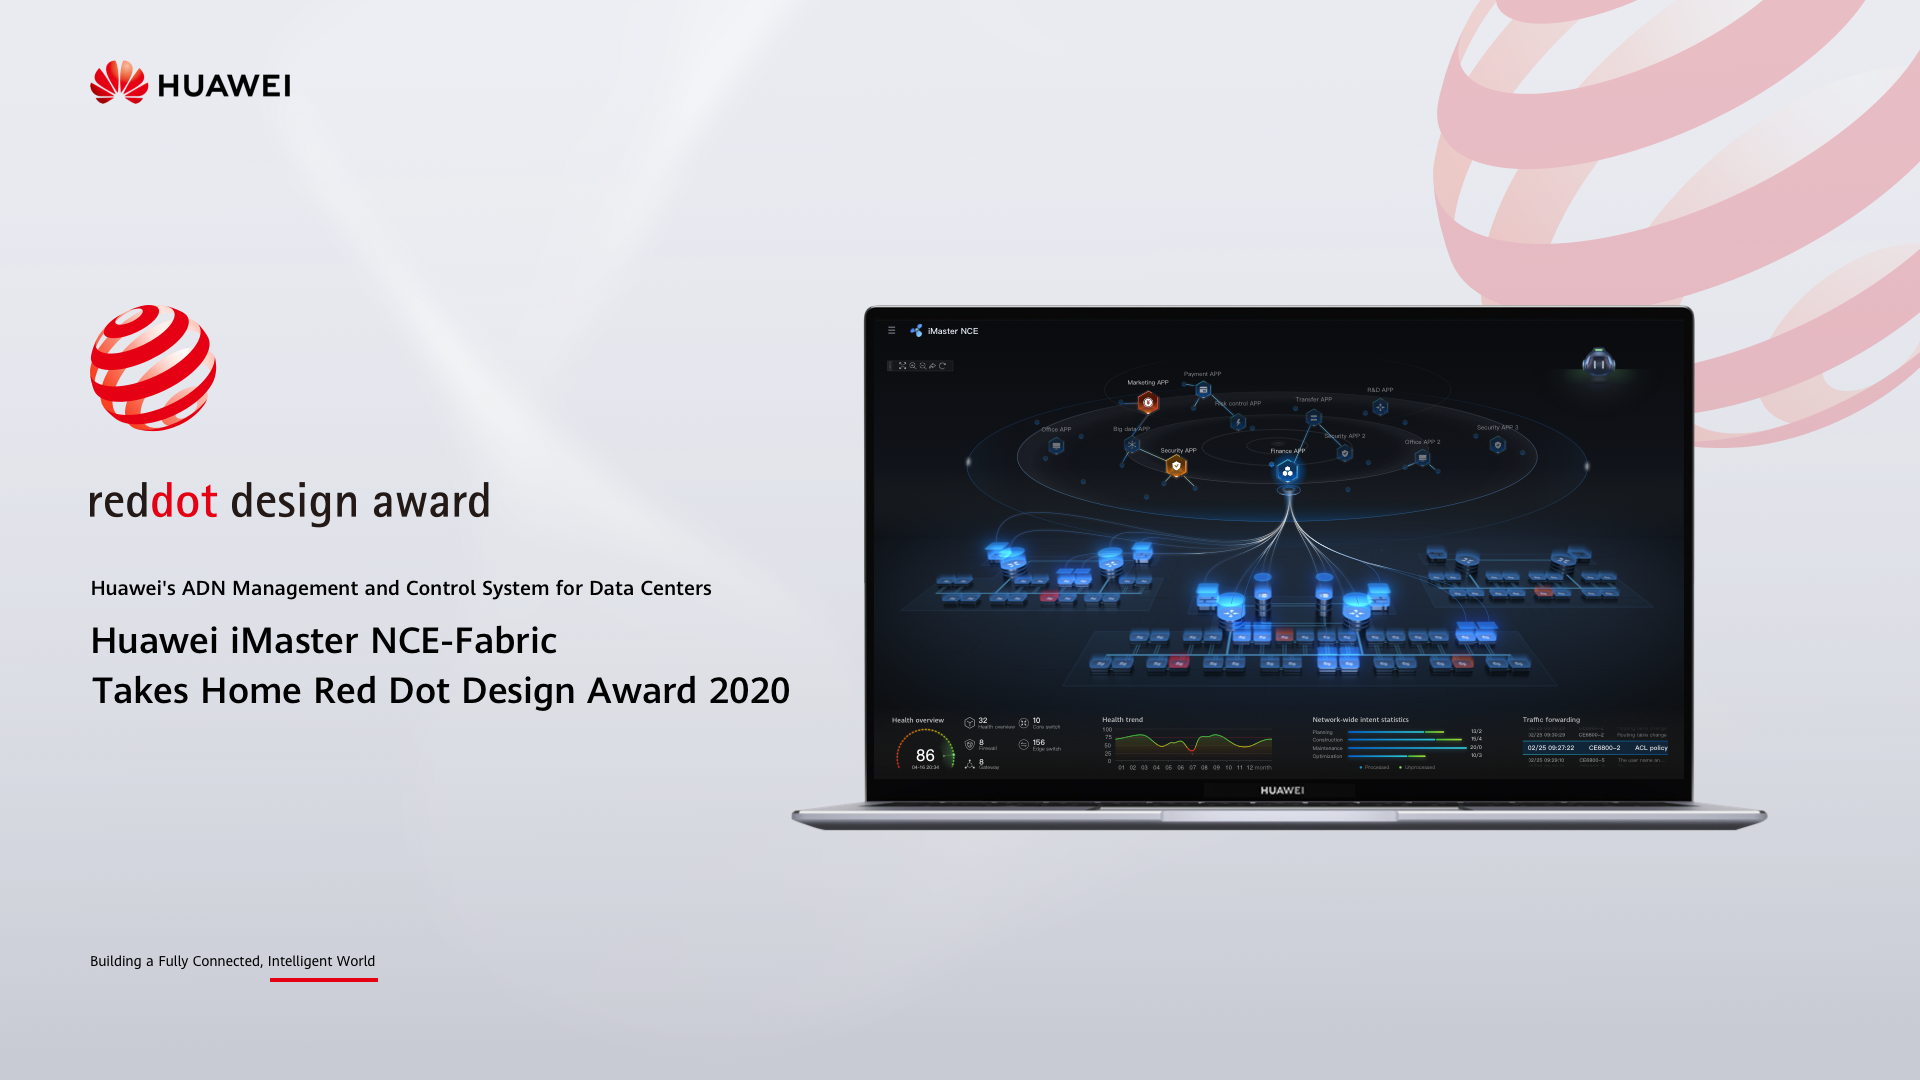 A graphic celebrating the Red Dot Design Award 2020 won by Huawei's iMaster NCE-Fabric, a network automation platform